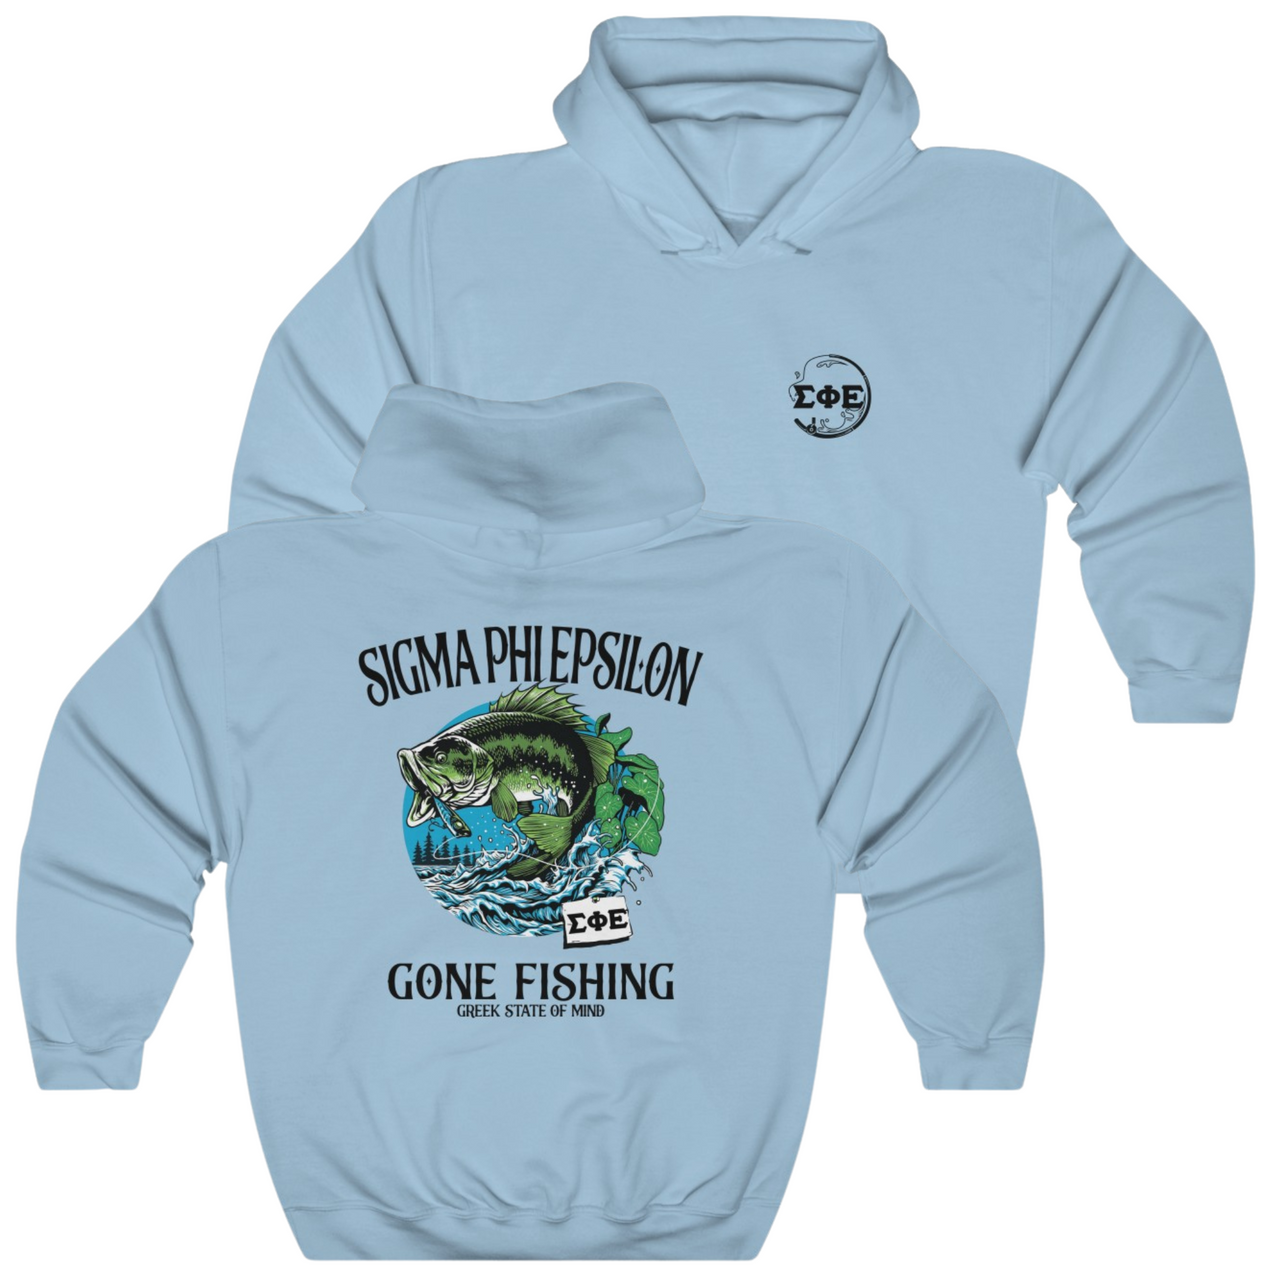 Light Blue Sigma Phi Epsilon Graphic Hoodie | Gone Fishing | SigEp Clothing - Campus Apparel